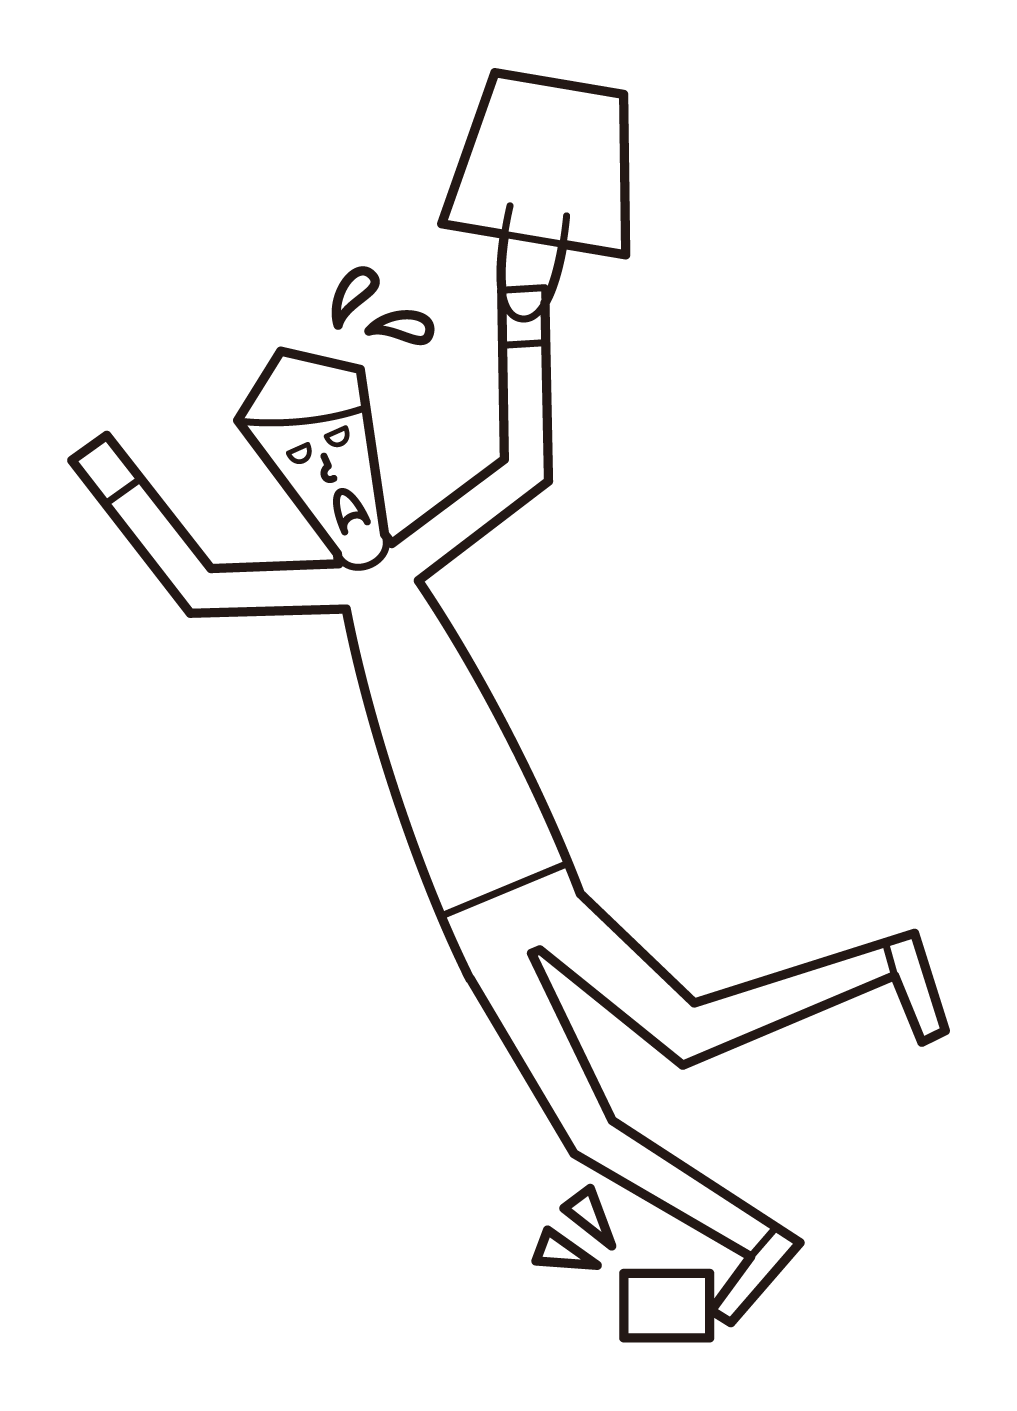 Illustration of a man (male) who falls over